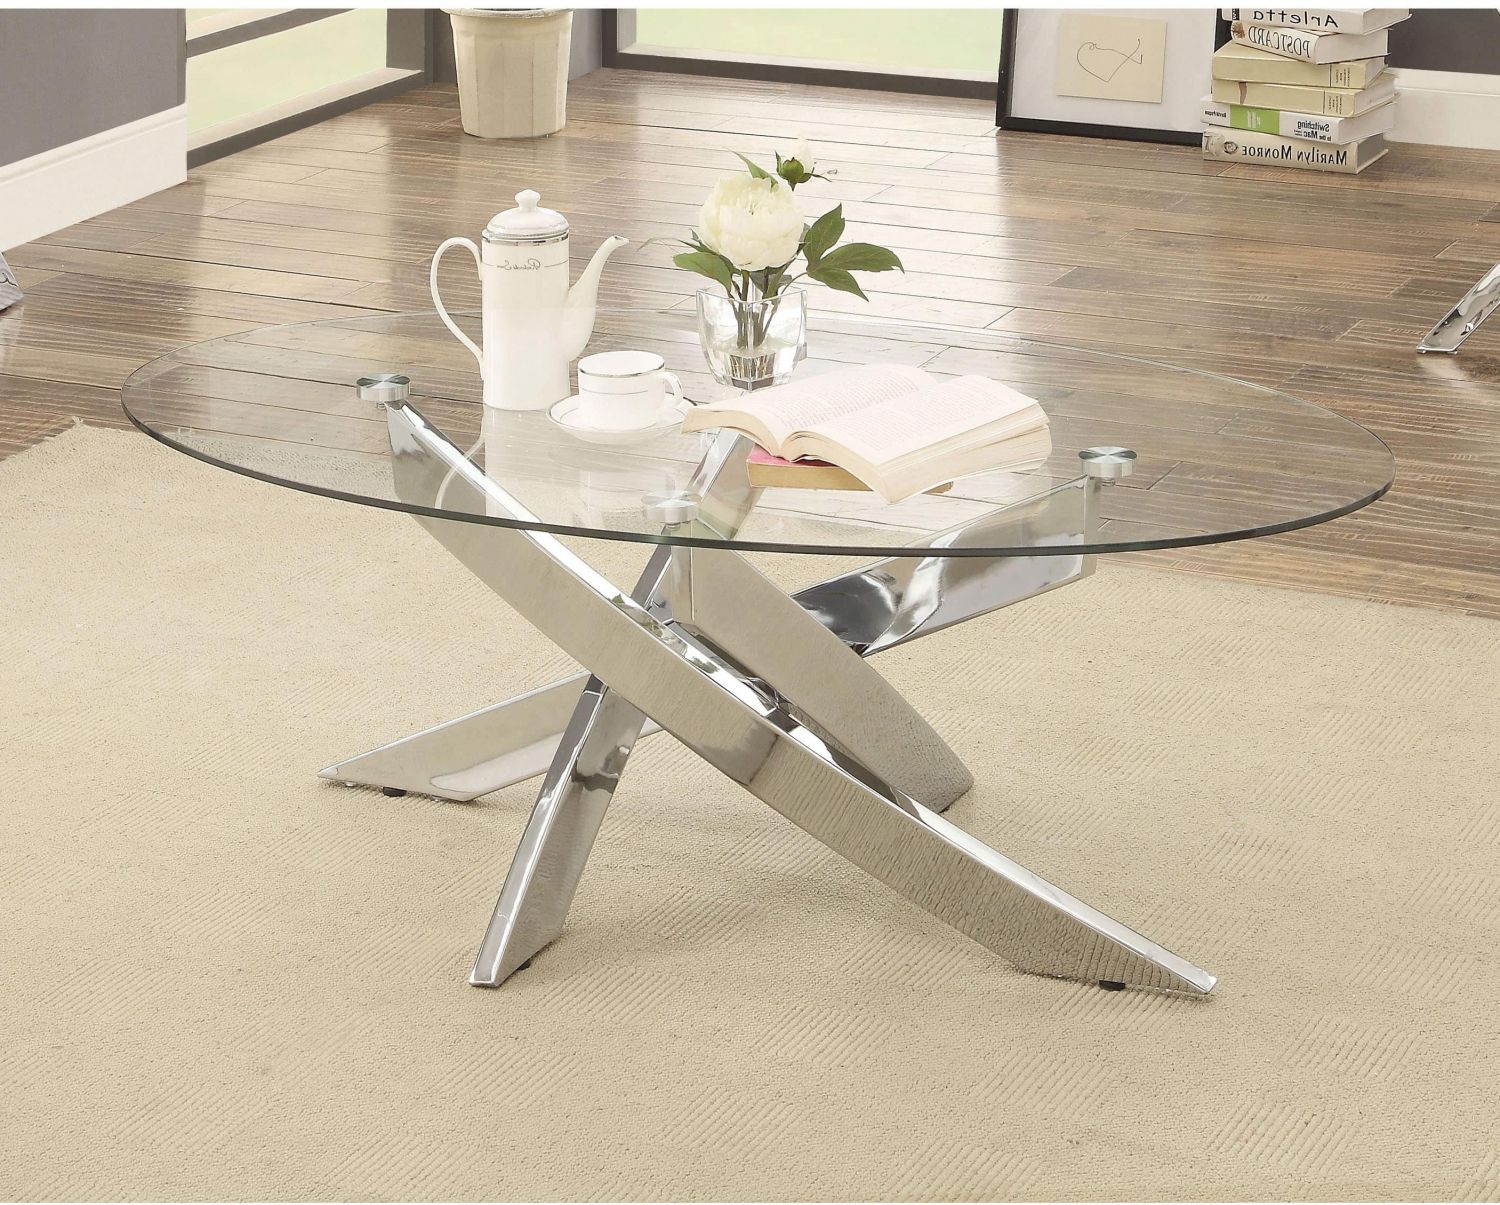 Chrome Coffee Tables Regarding Best And Newest Glass, Chrome Oval Coffee Table Shiny Silver Criss Cross (View 13 of 20)